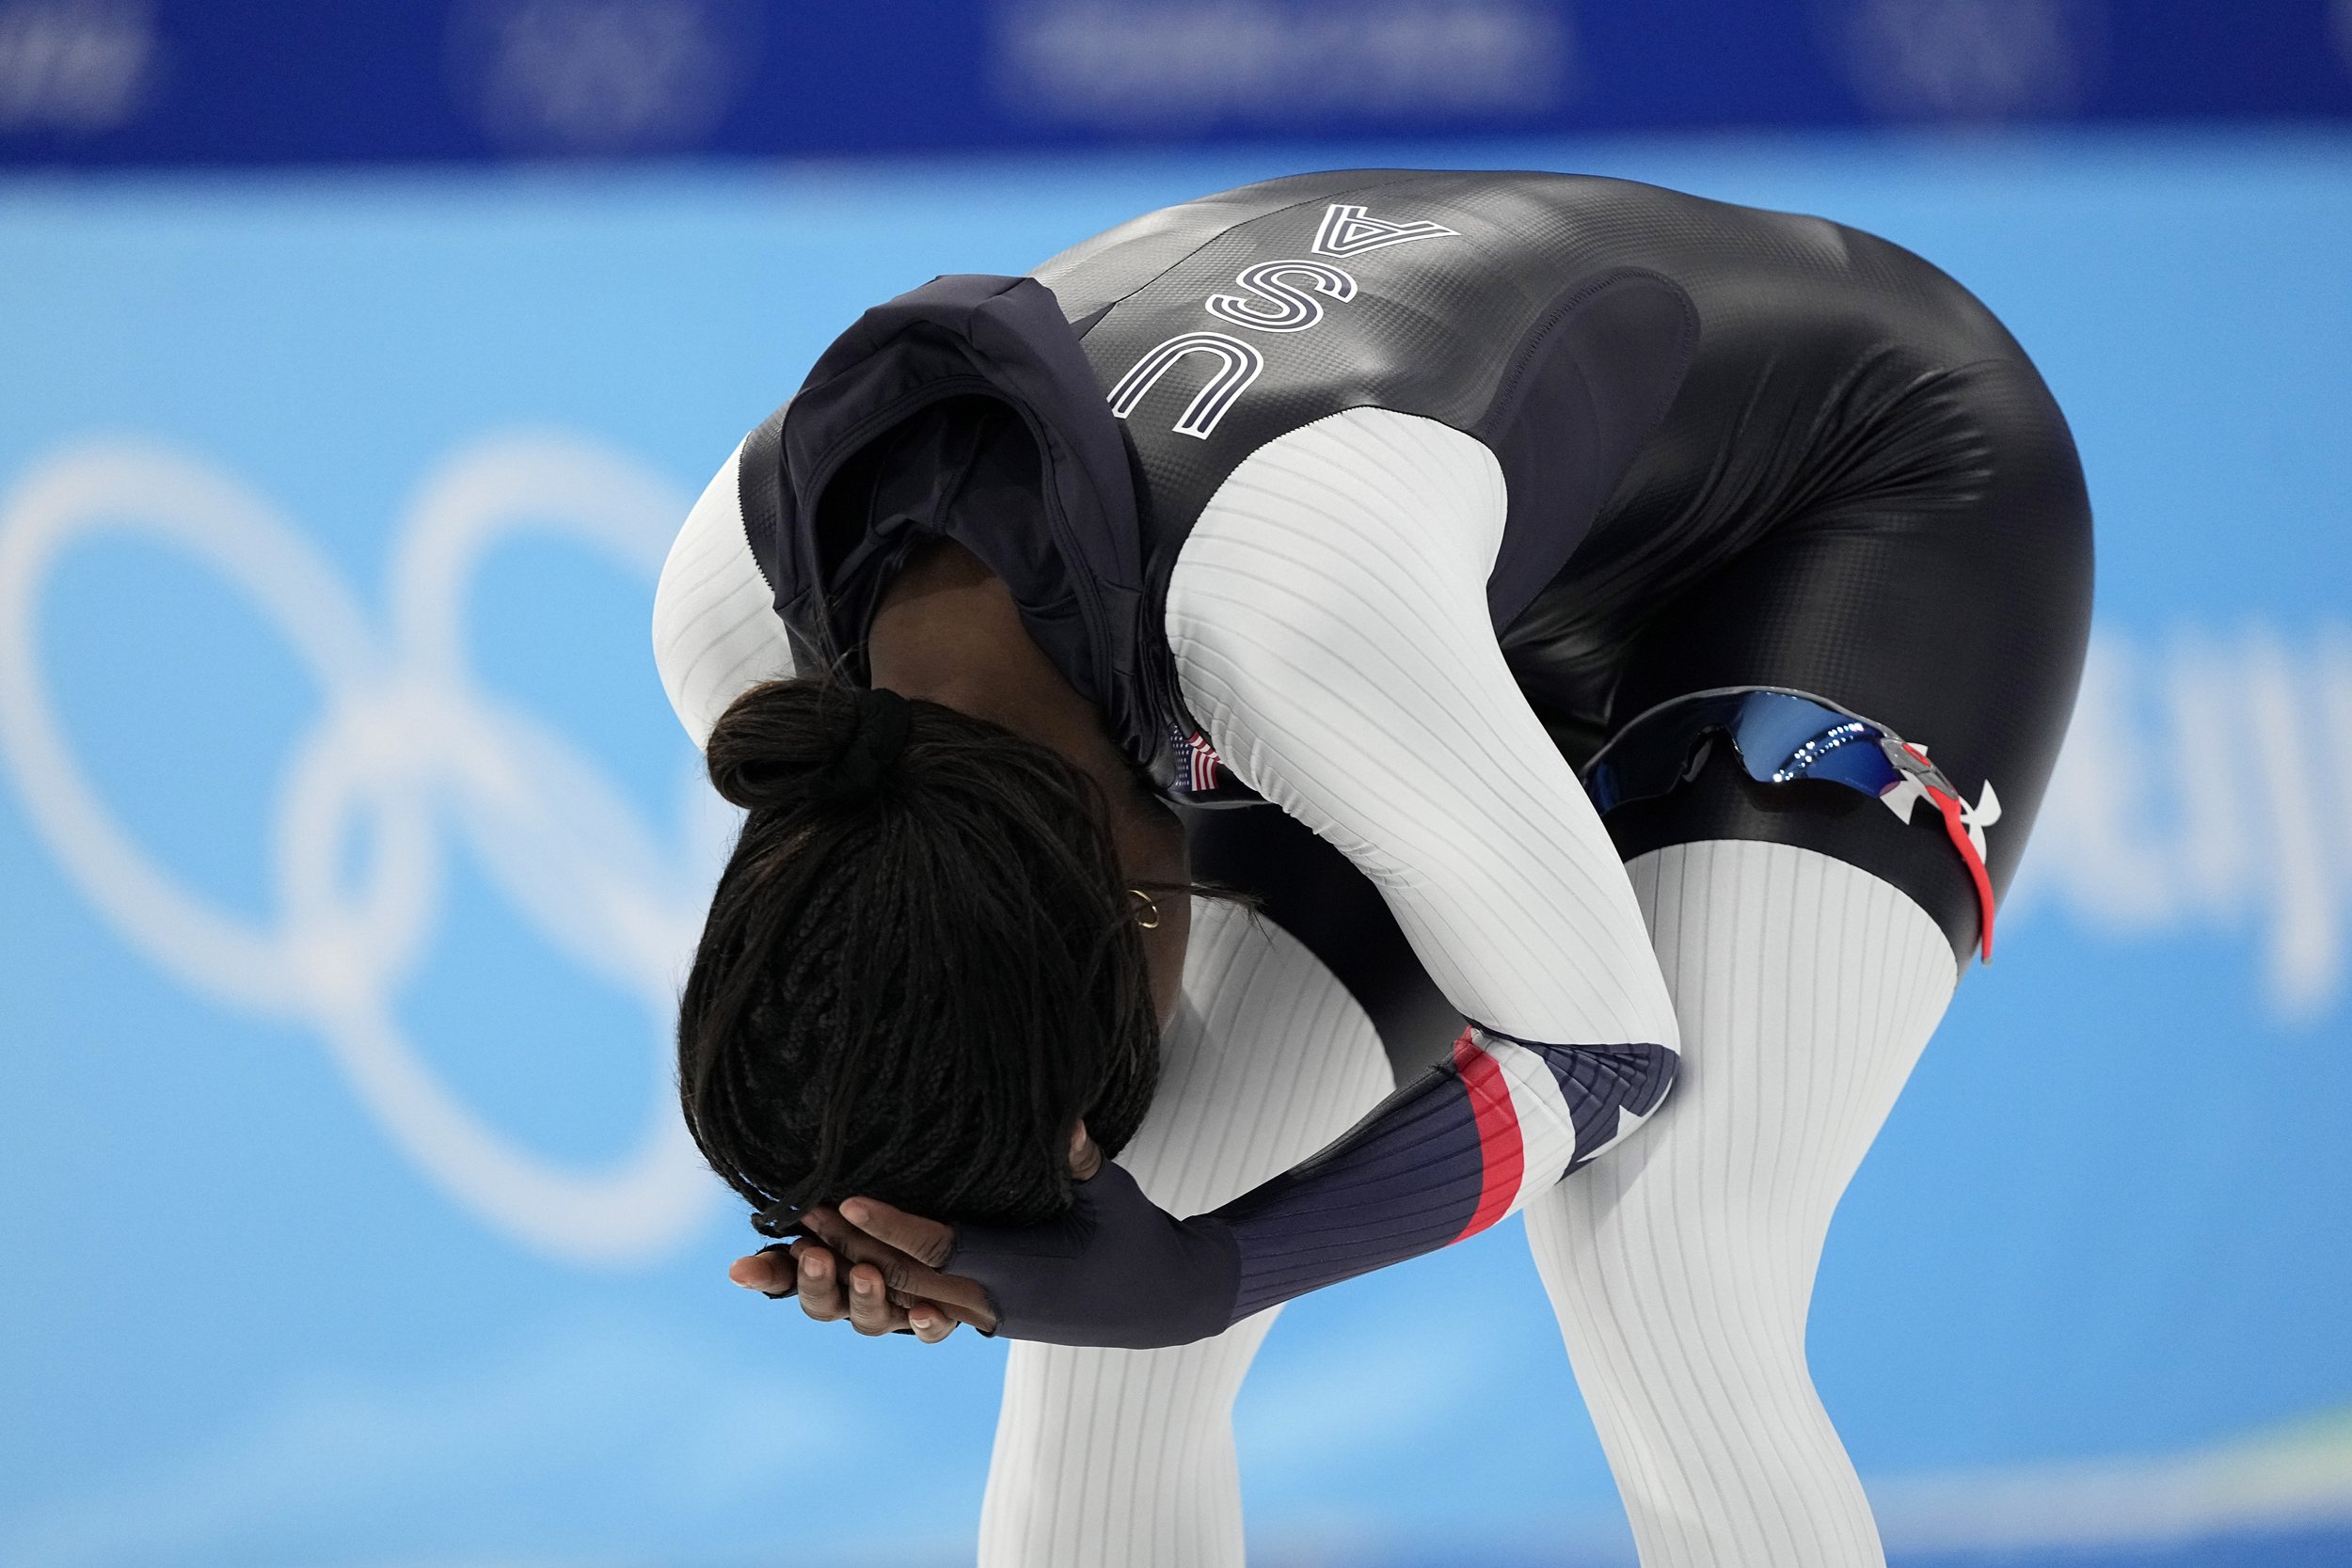  Erin Jackson of the United States reacts after winning the gold medal in the speedskating women's 500-meter race at the 2022 Winter Olympics, Sunday, Feb. 13, 2022, in Beijing. (AP Photo/Ashley Landis) 